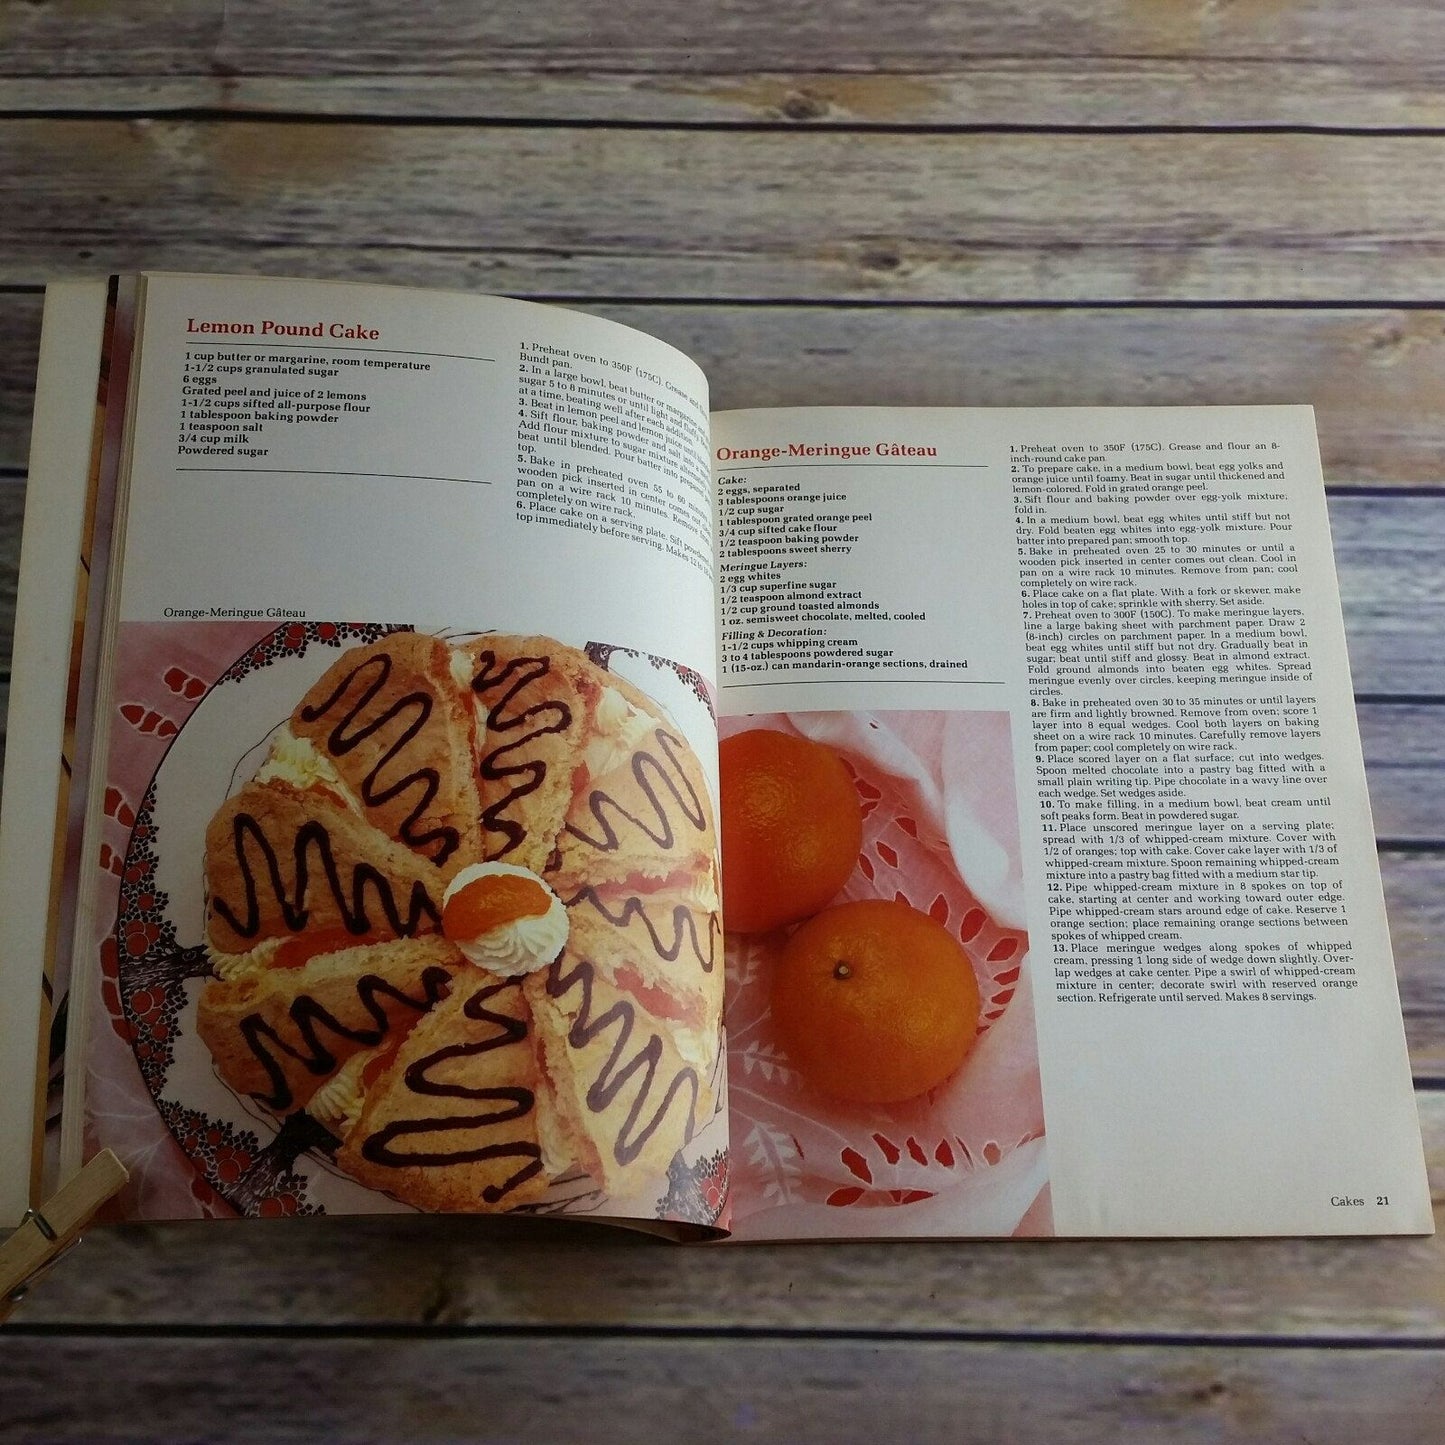 Vintage Cookbook Delicious Baking Recipes 1985 Mary Cadogan Paperback HP Books 1980s Baking Book